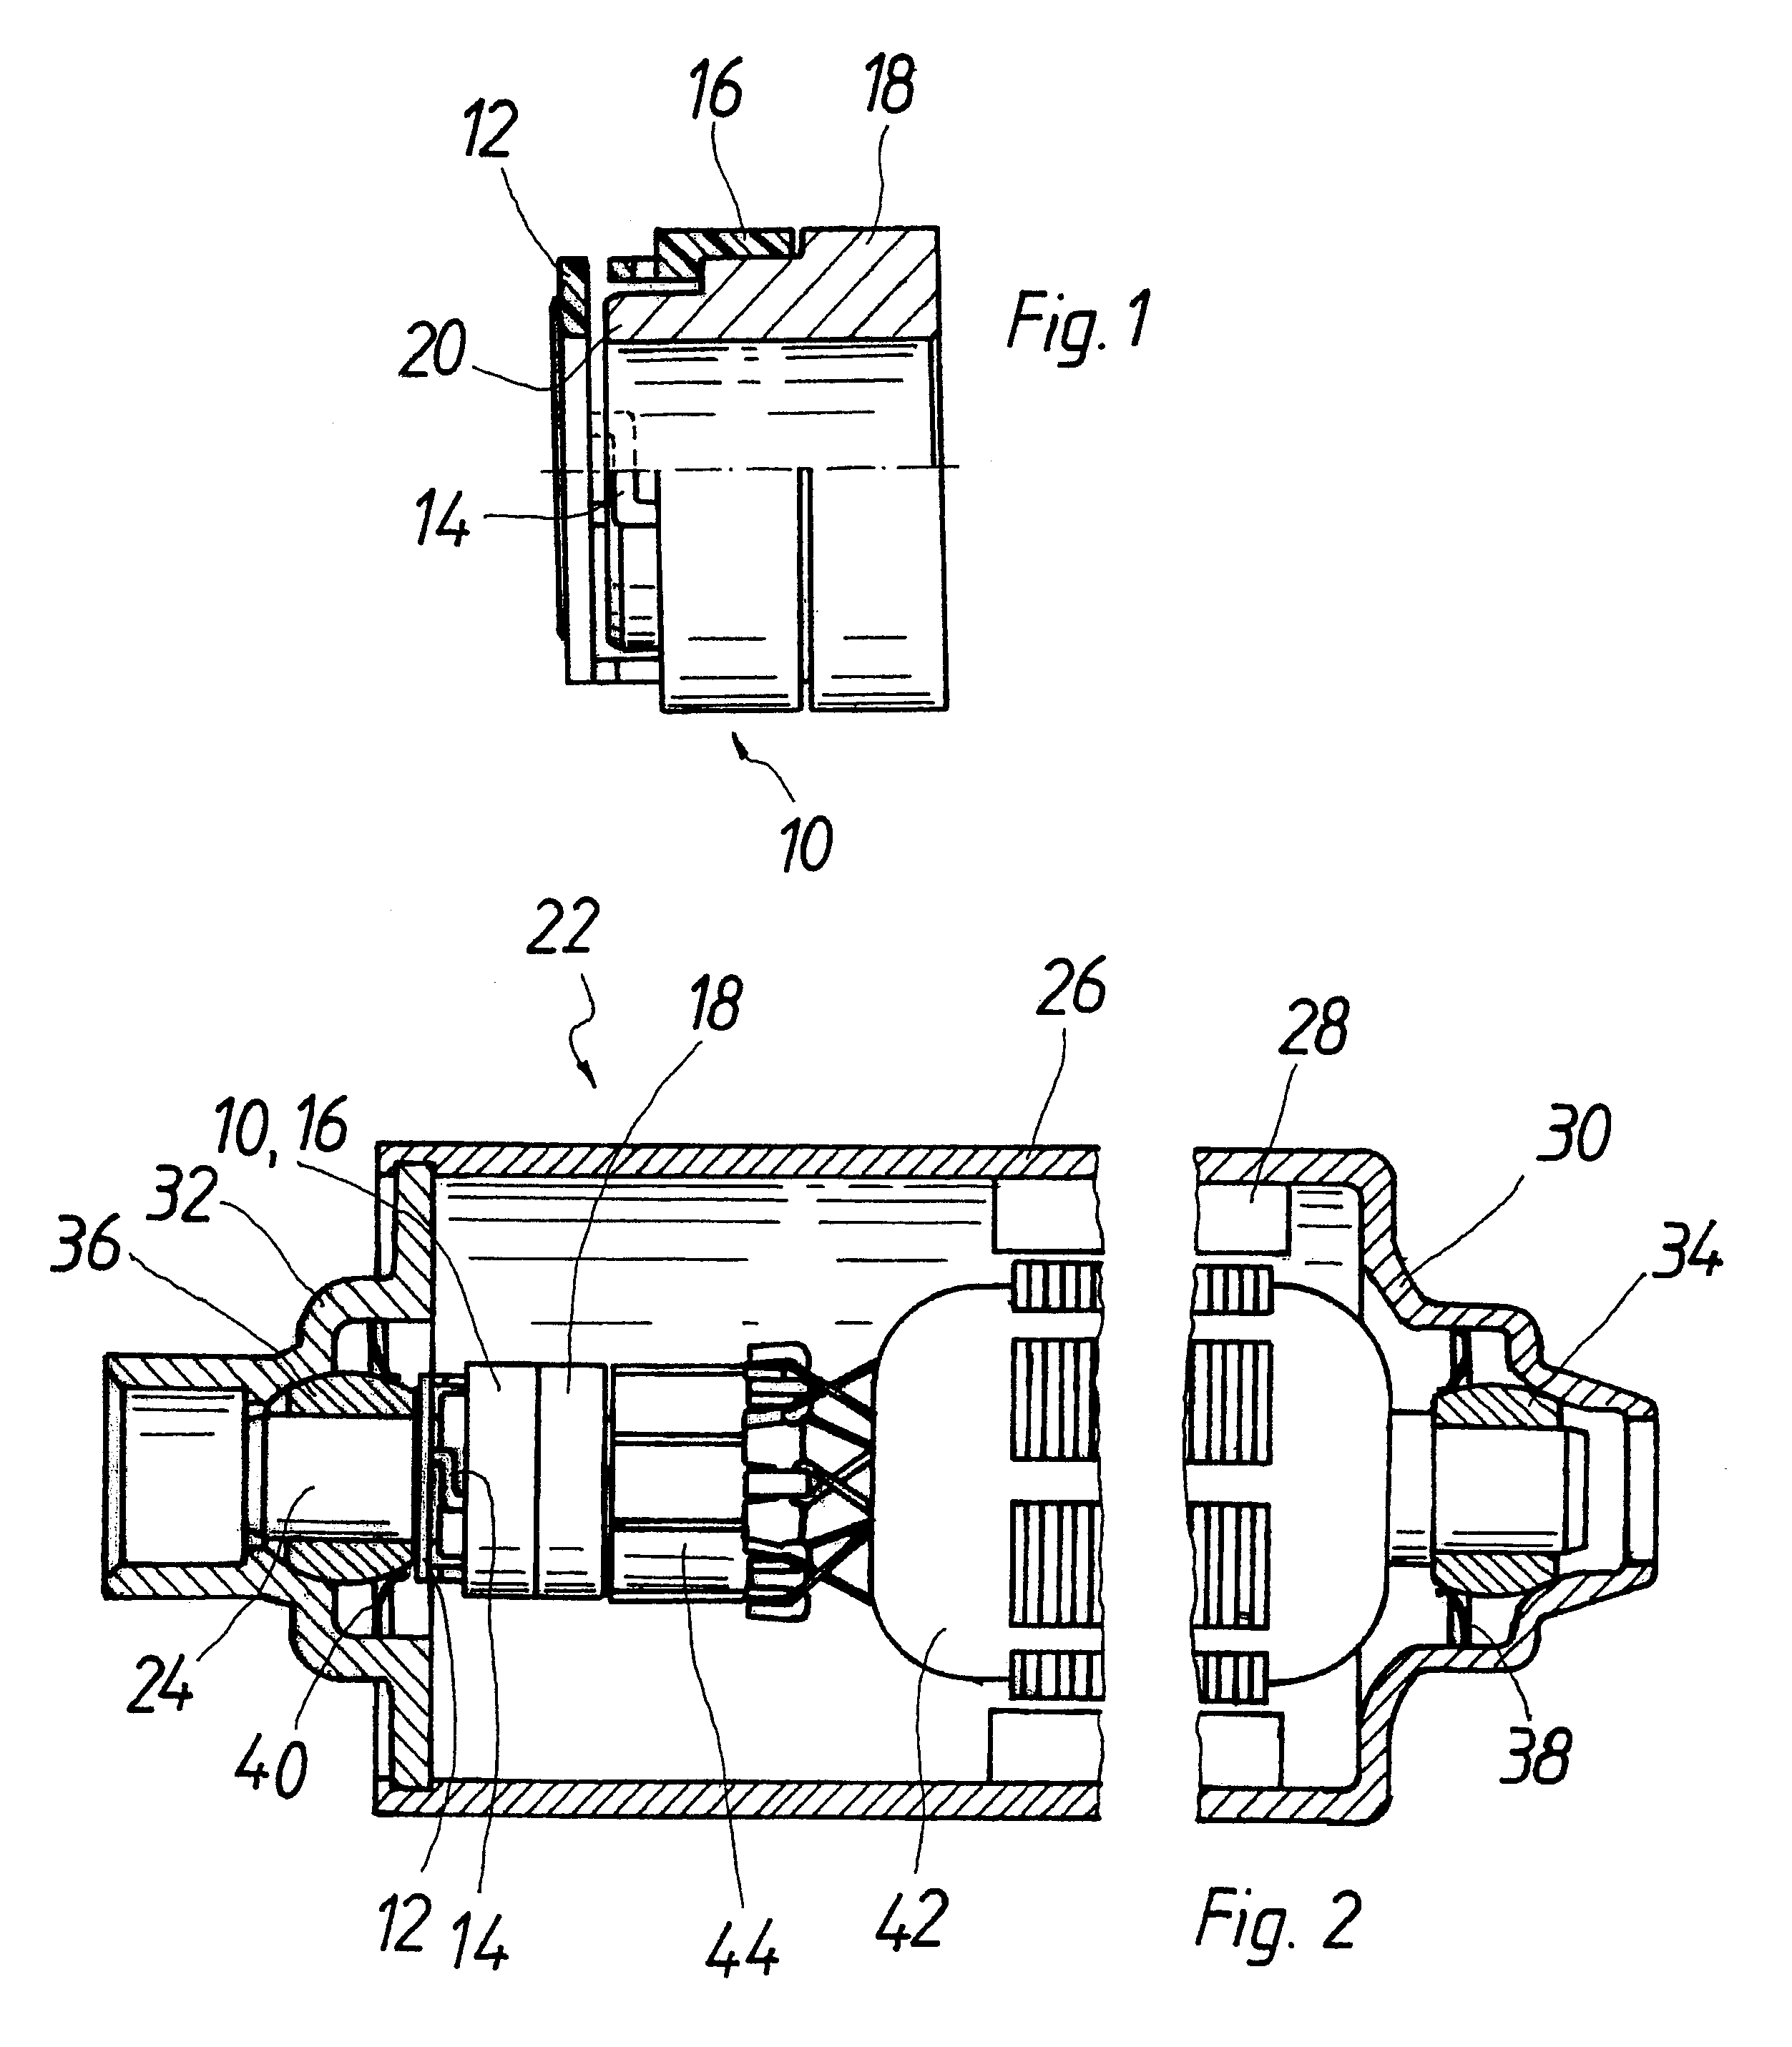 Spring element for compensating axial play in a motor shaft of an electric motor